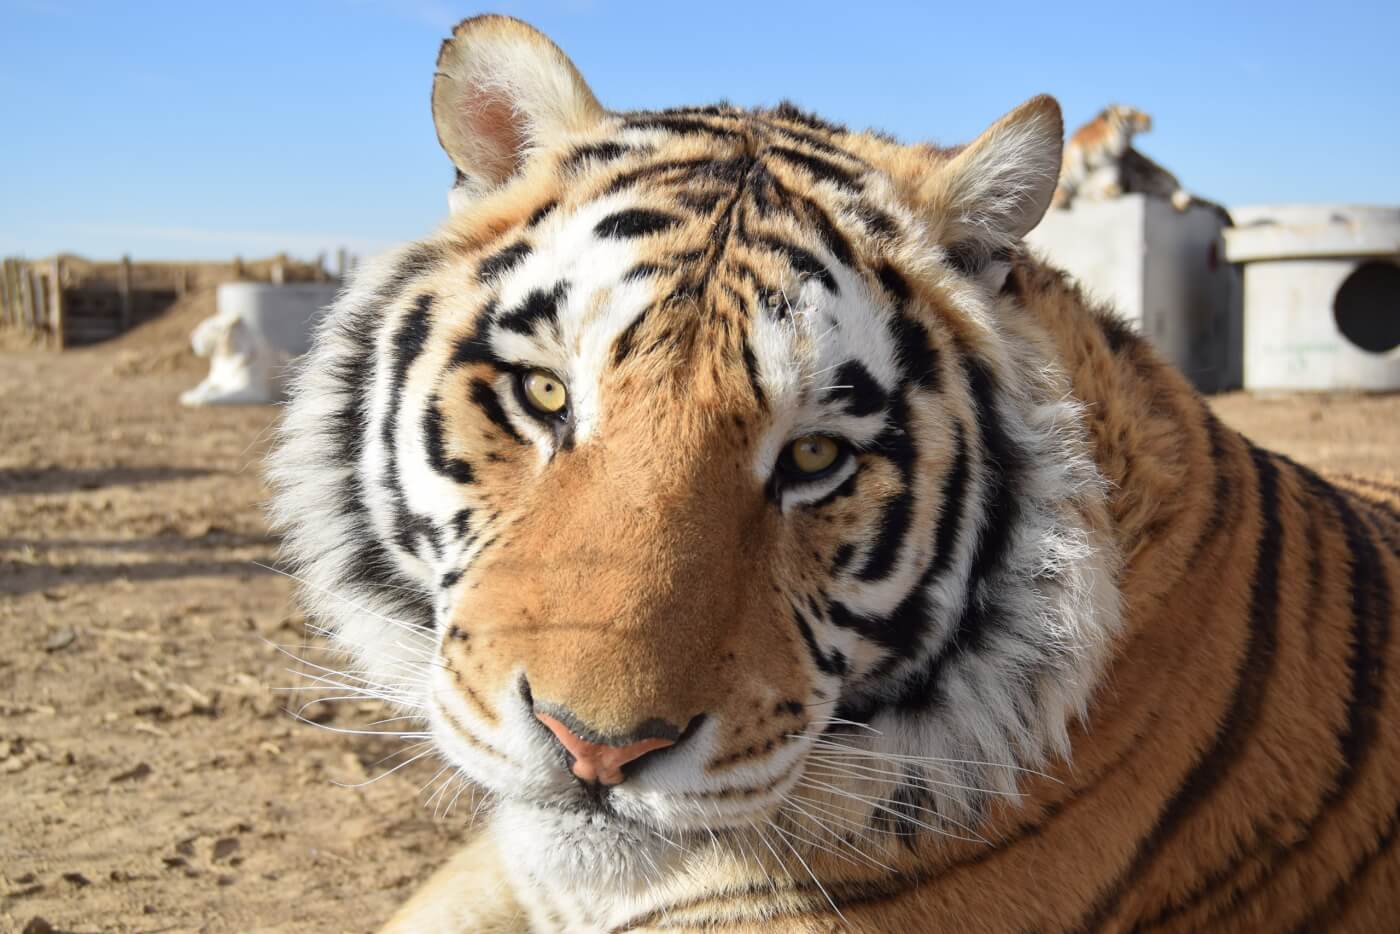 39 Tigers From 'Tiger King' Now at Accredited Sanctuary | PETA